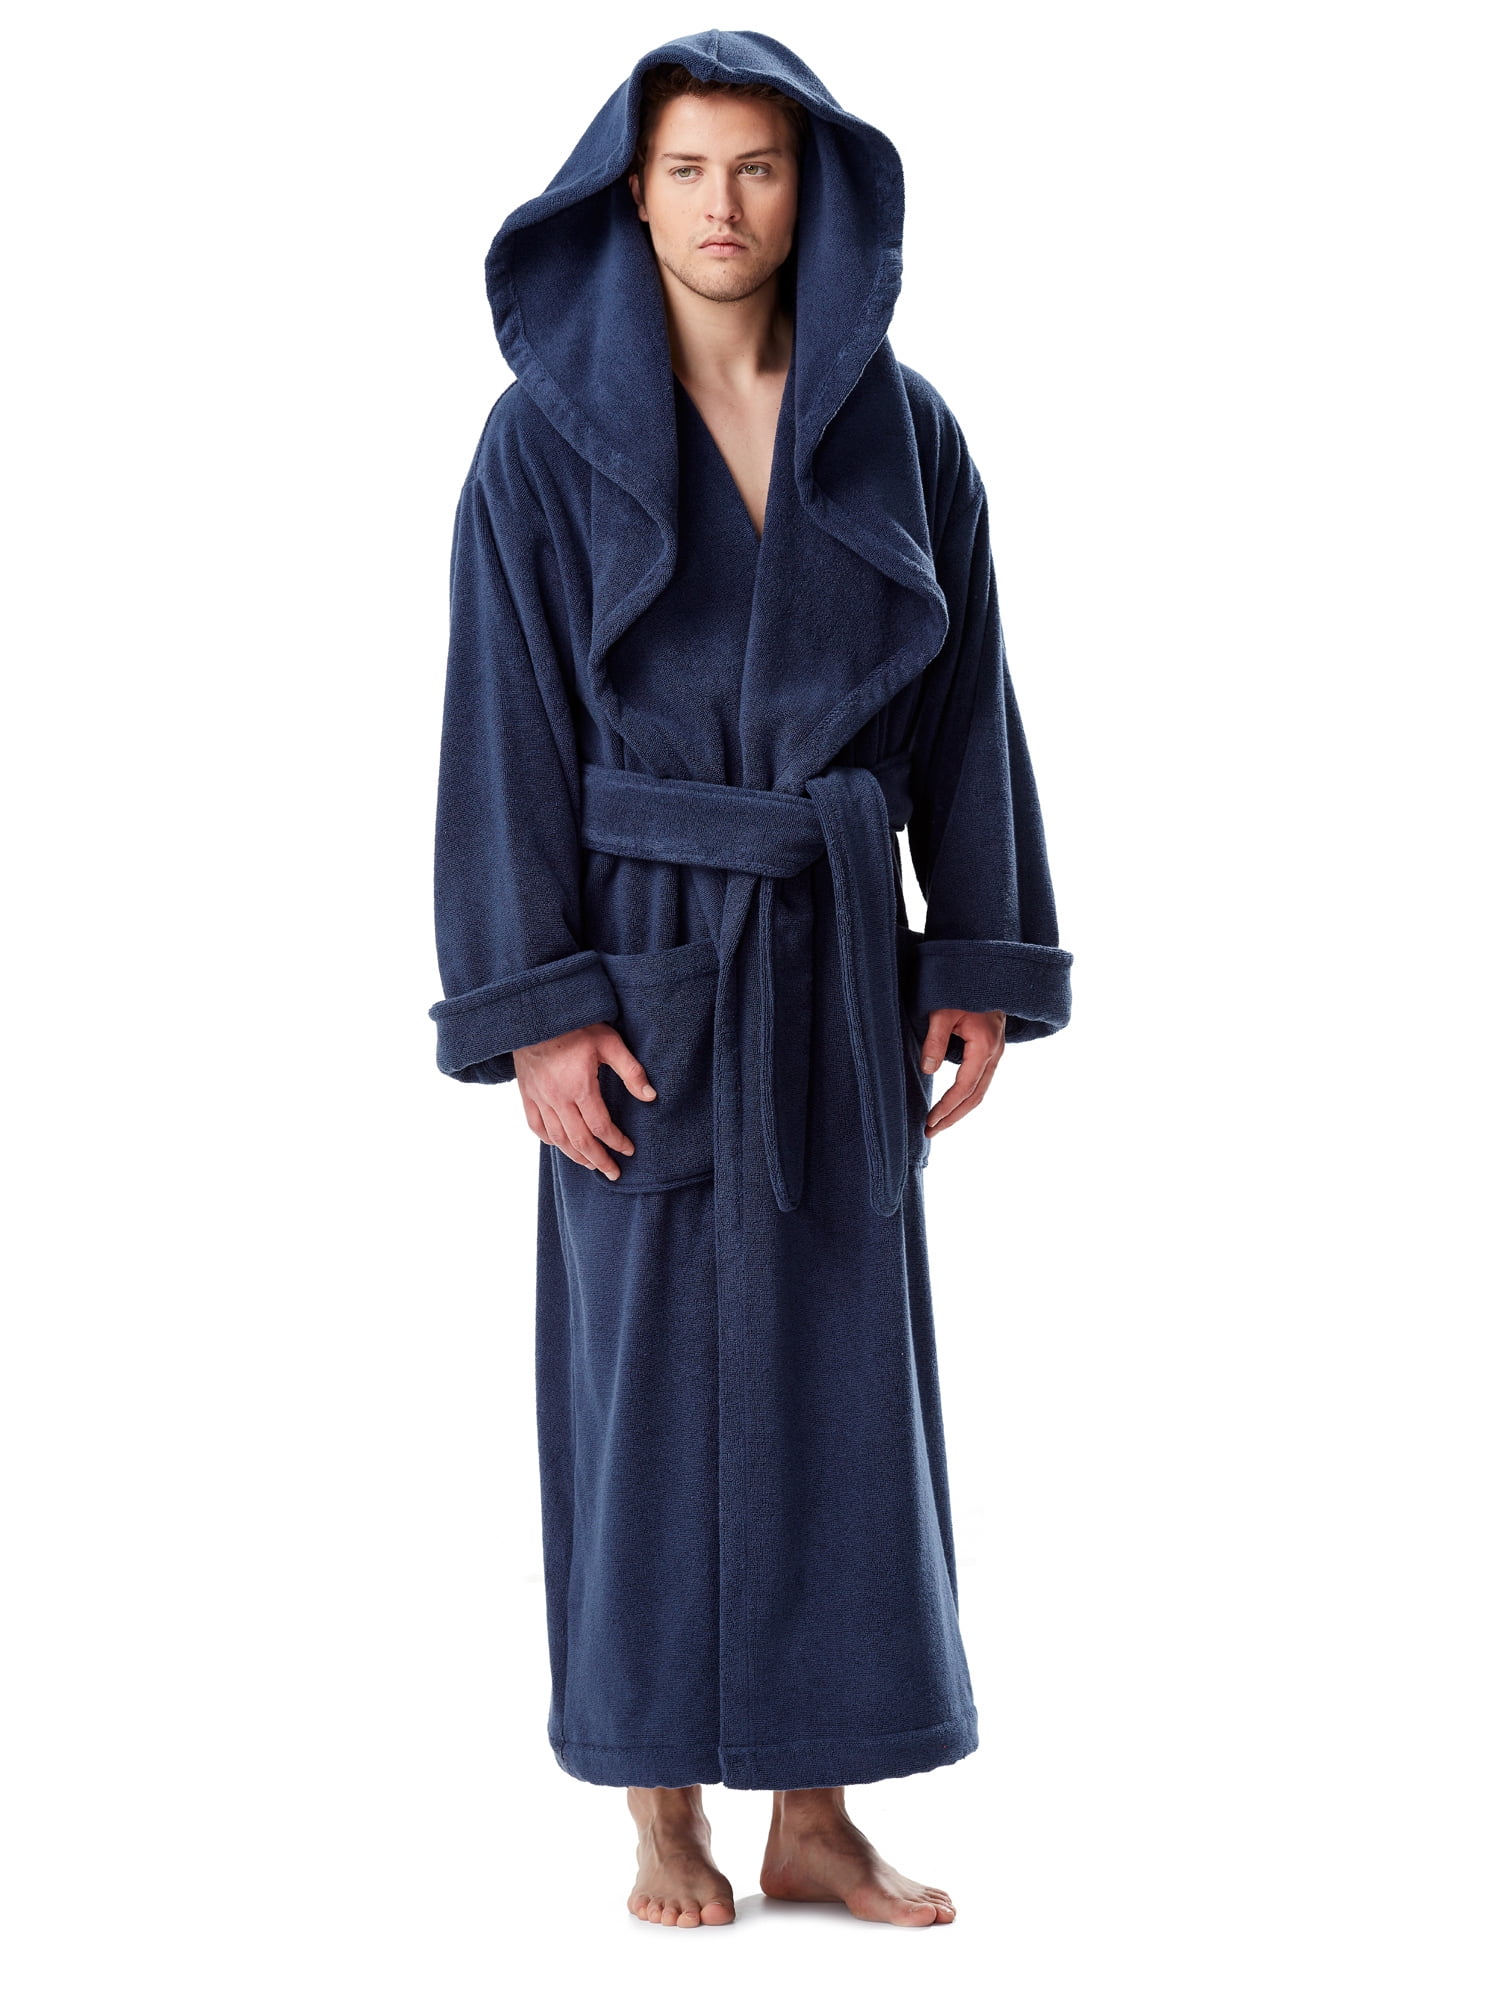 Men's Luxury Medieval Monk Robe Style Full Length Hooded Turkish Terry ...